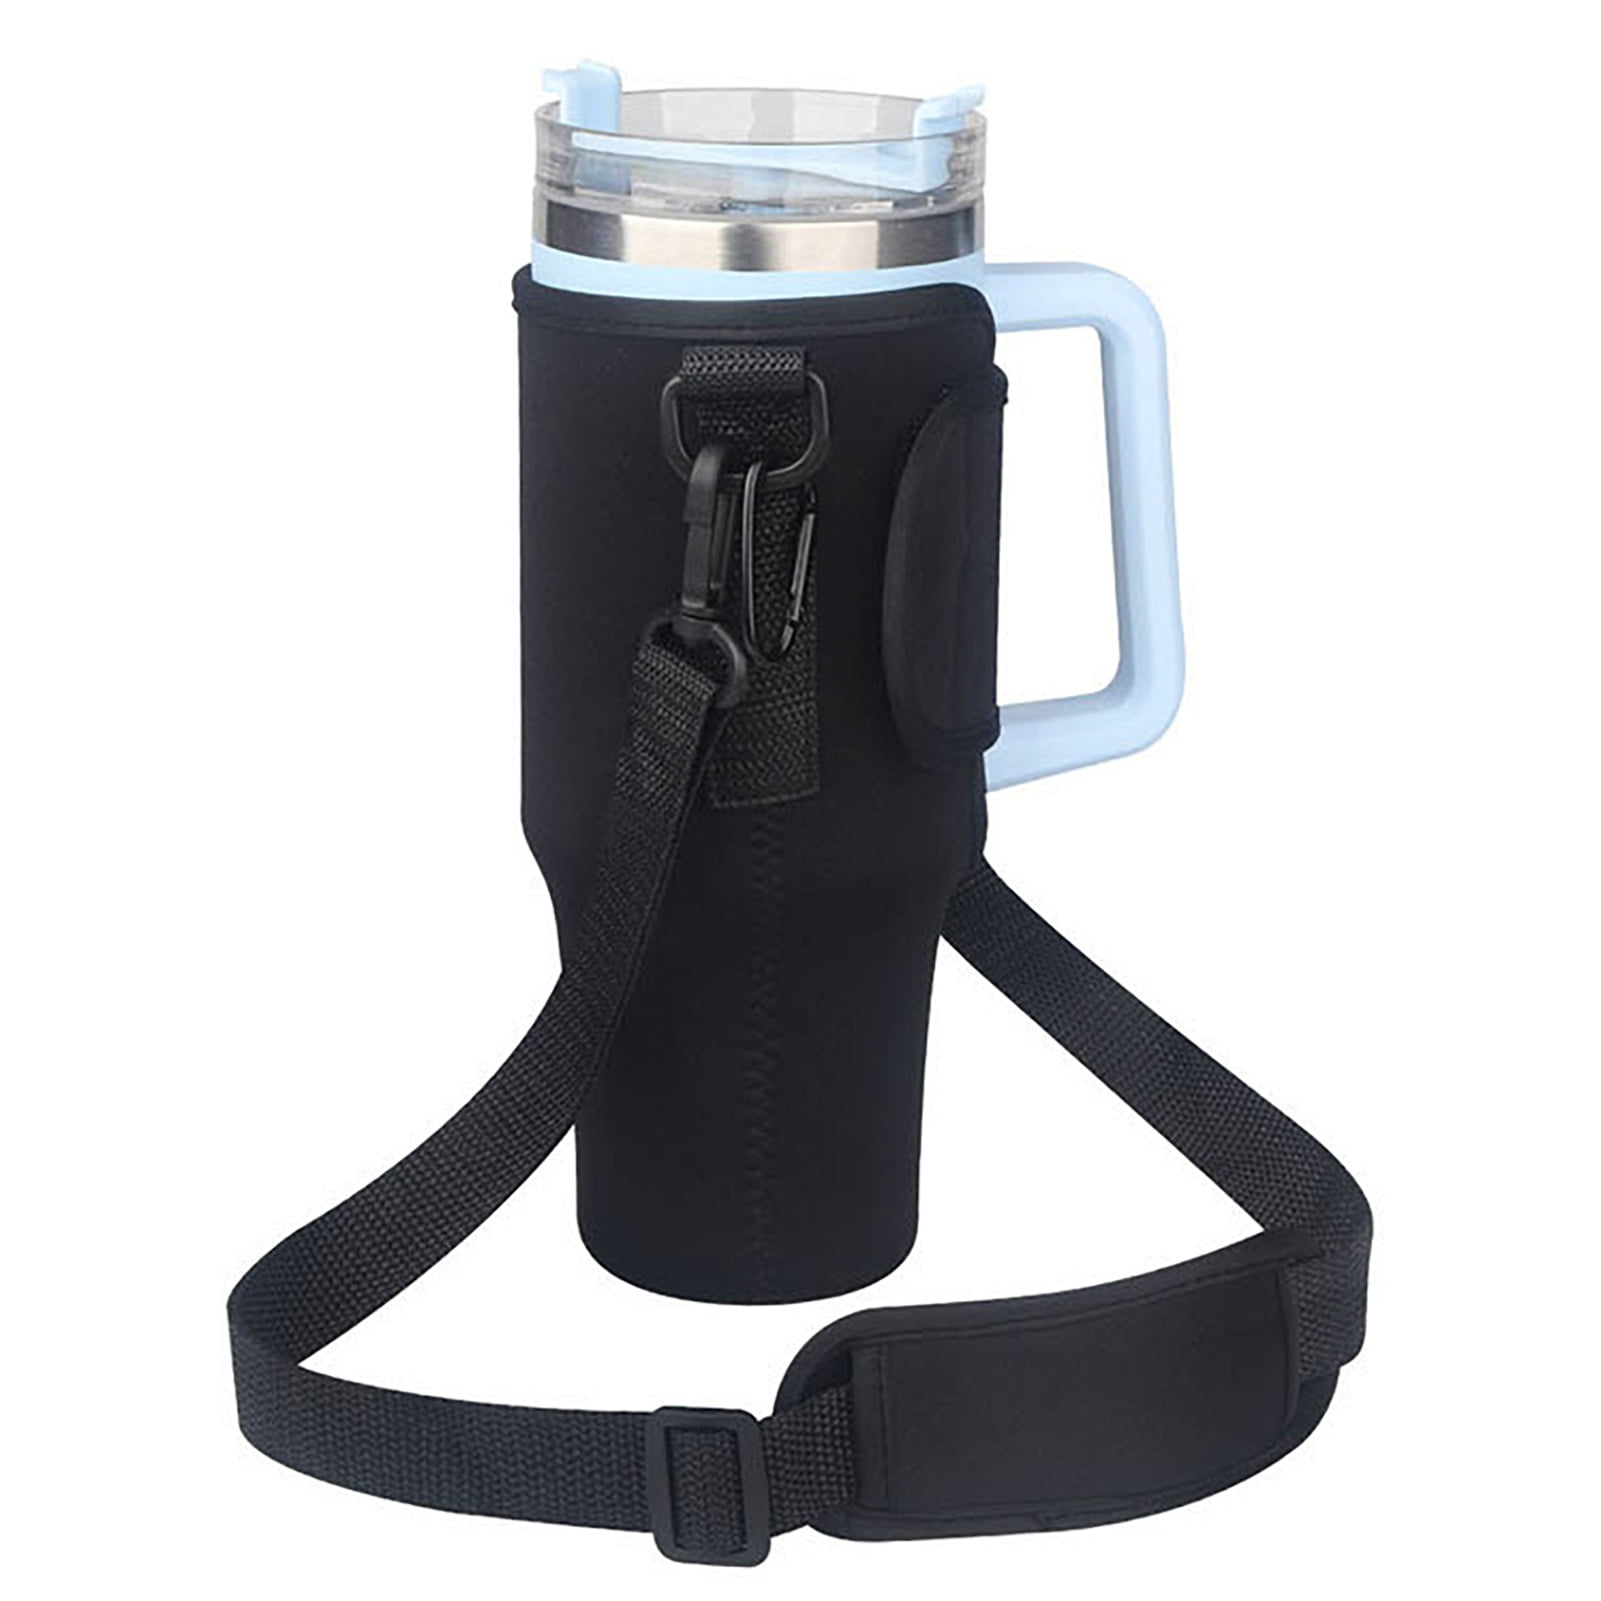  TMEOIIPY Water Bottle Holder with Strap & Pockets for Stanley  Quencher 40oz Tumbler with Handle, Water Bottle Carrier Bag with Adjustable  Shoulder Strap for Walking Hiking Travelling Camping : Sports